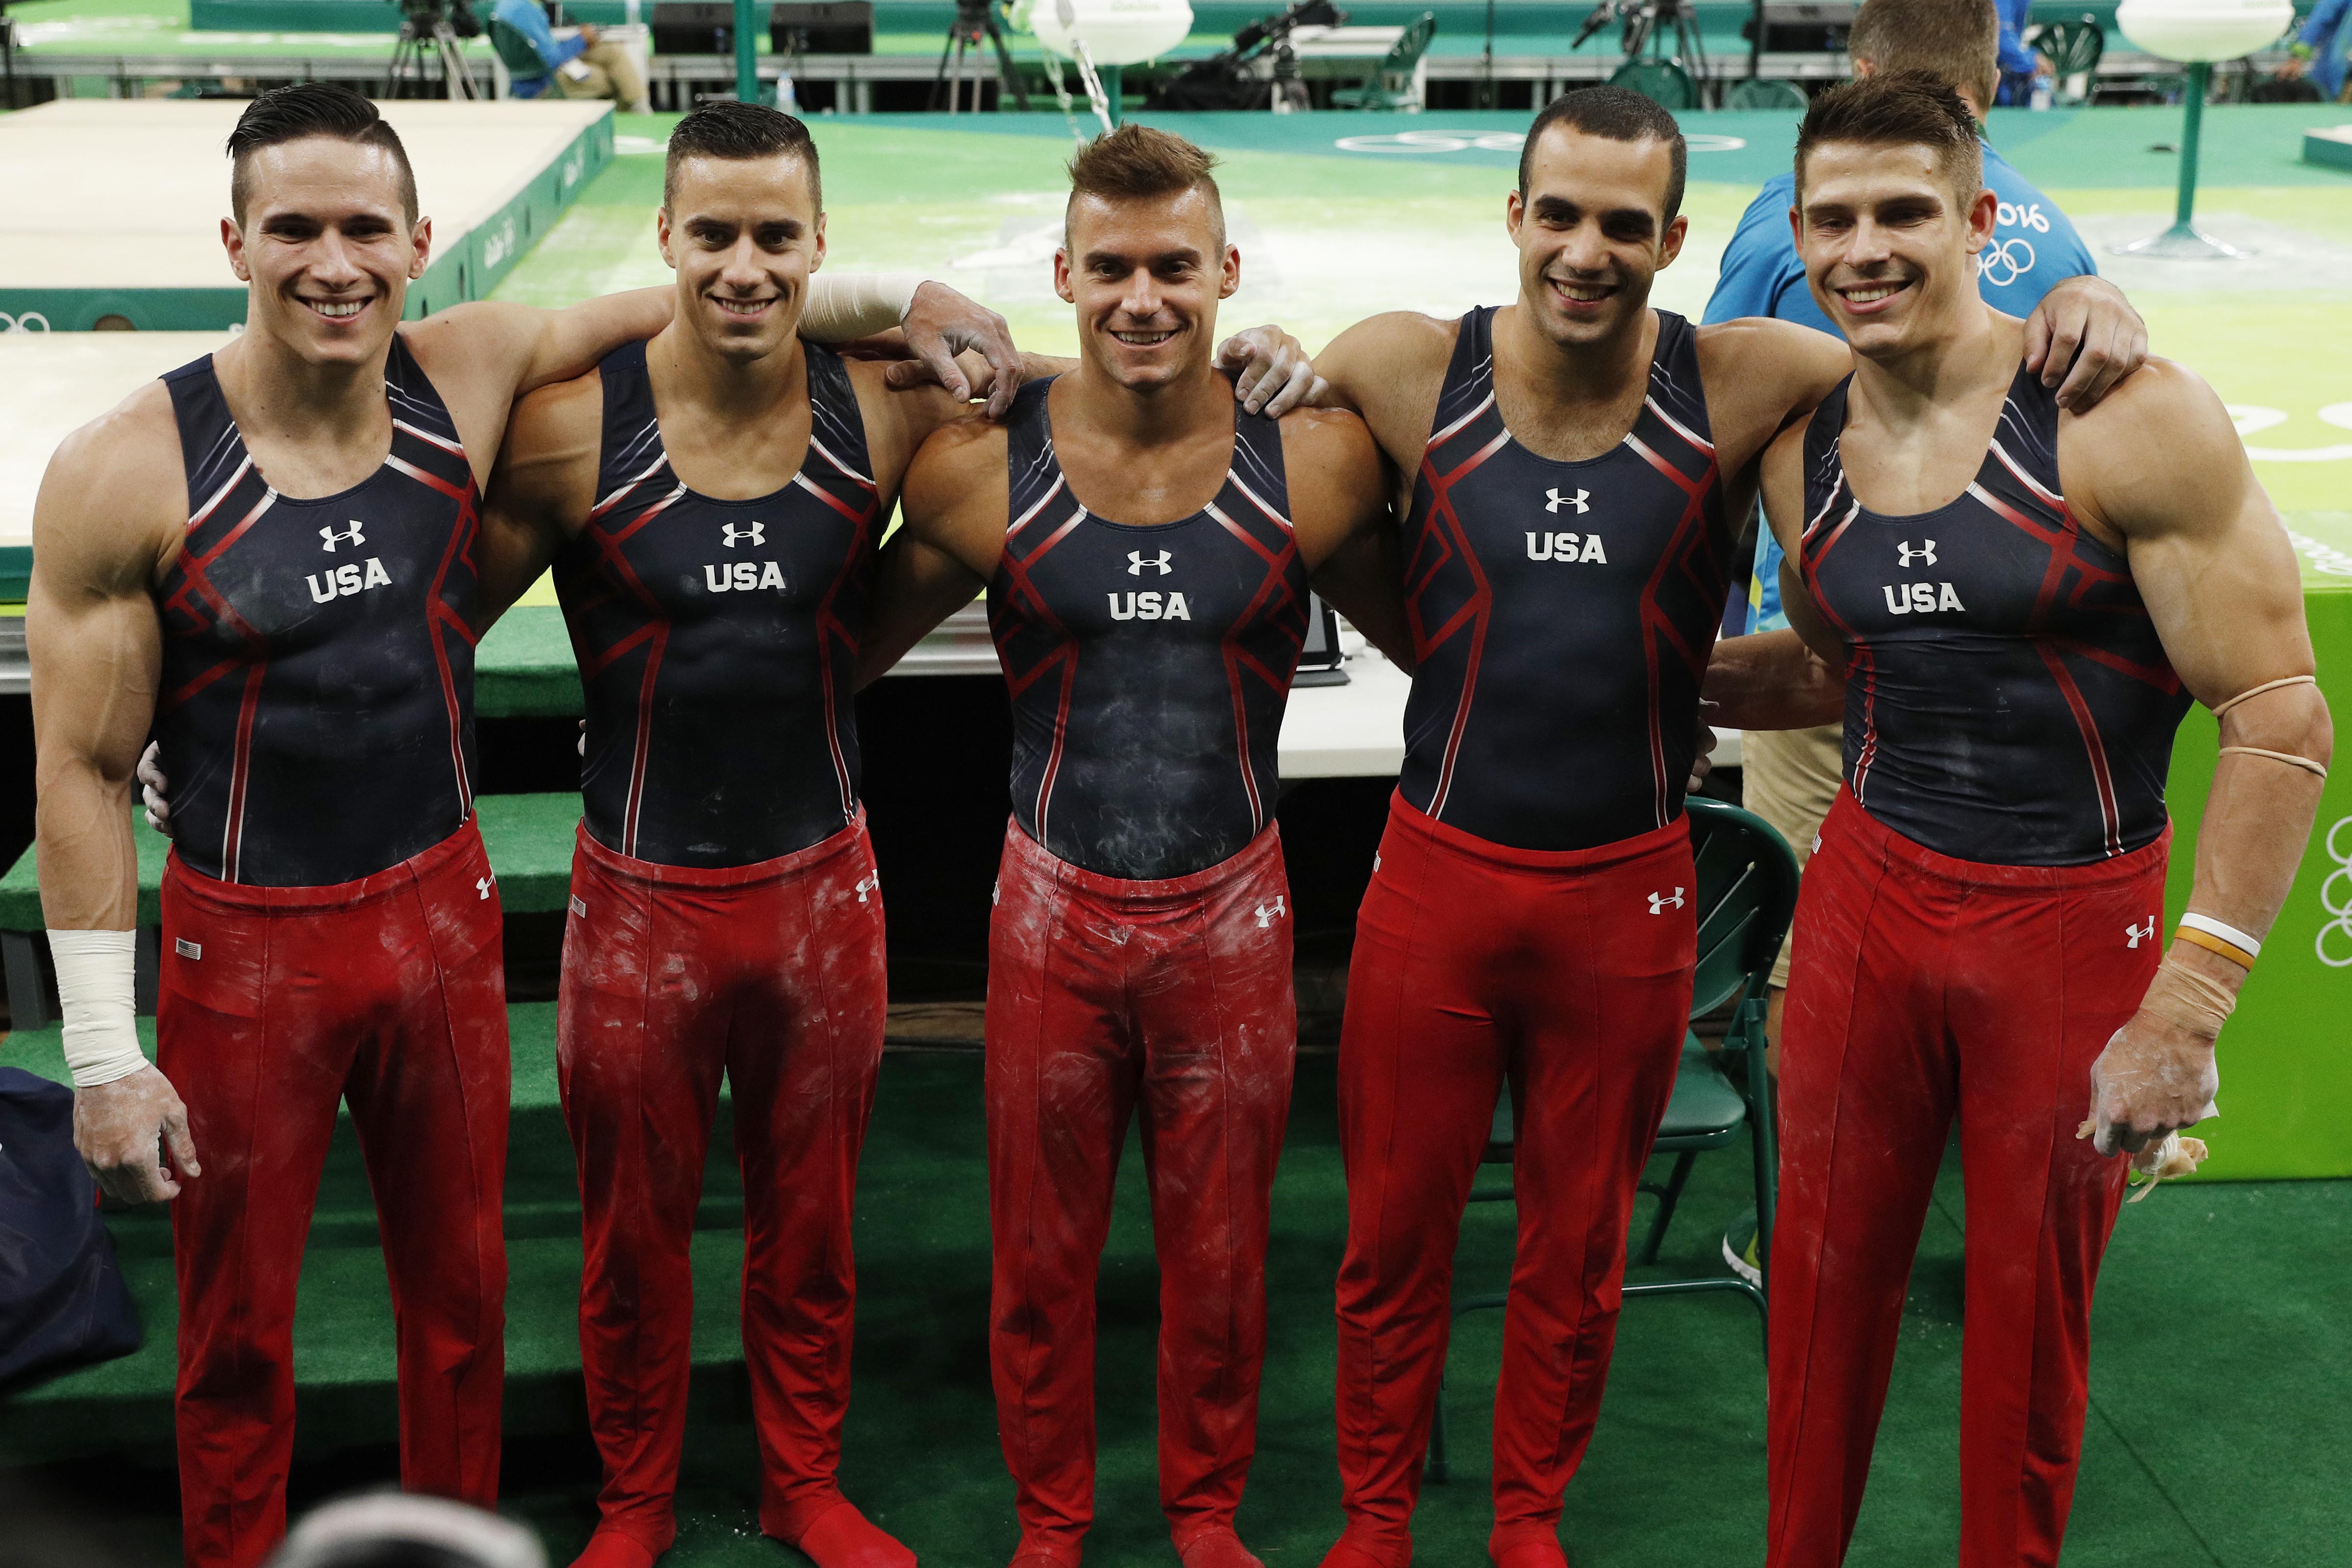 Meet The 10 Team USA Gymnasts Who Are Going To The Tokyo Olympics